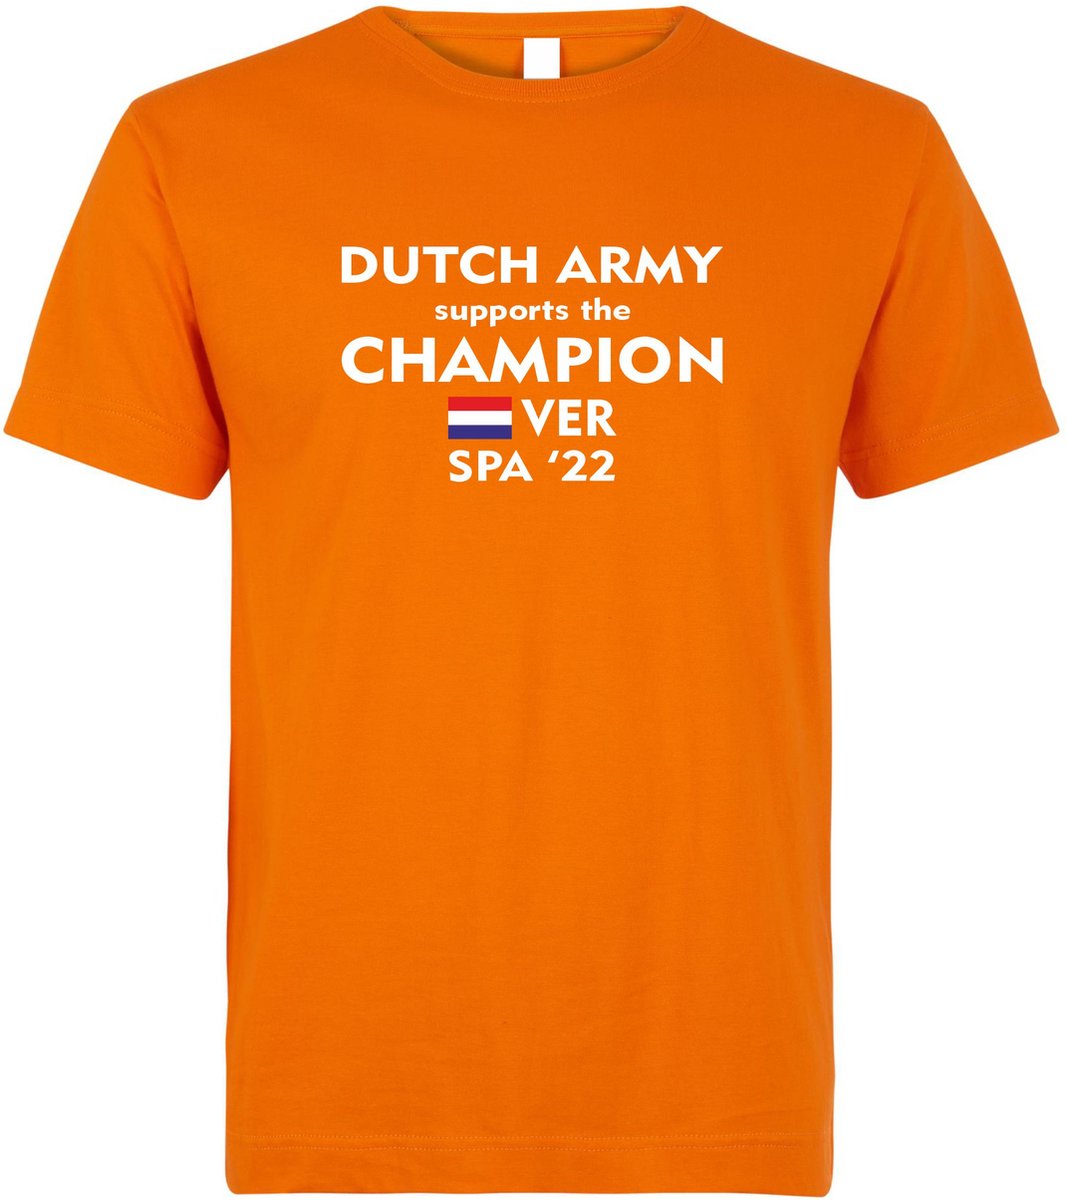 T-shirt kinderen Dutch Army supports the Champion Spa 22 | Max Verstappen / Red Bull Racing / Formule 1 fan | Grand Prix Circuit Spa-Francorchamps | kleding shirt | Oranje | maat 104